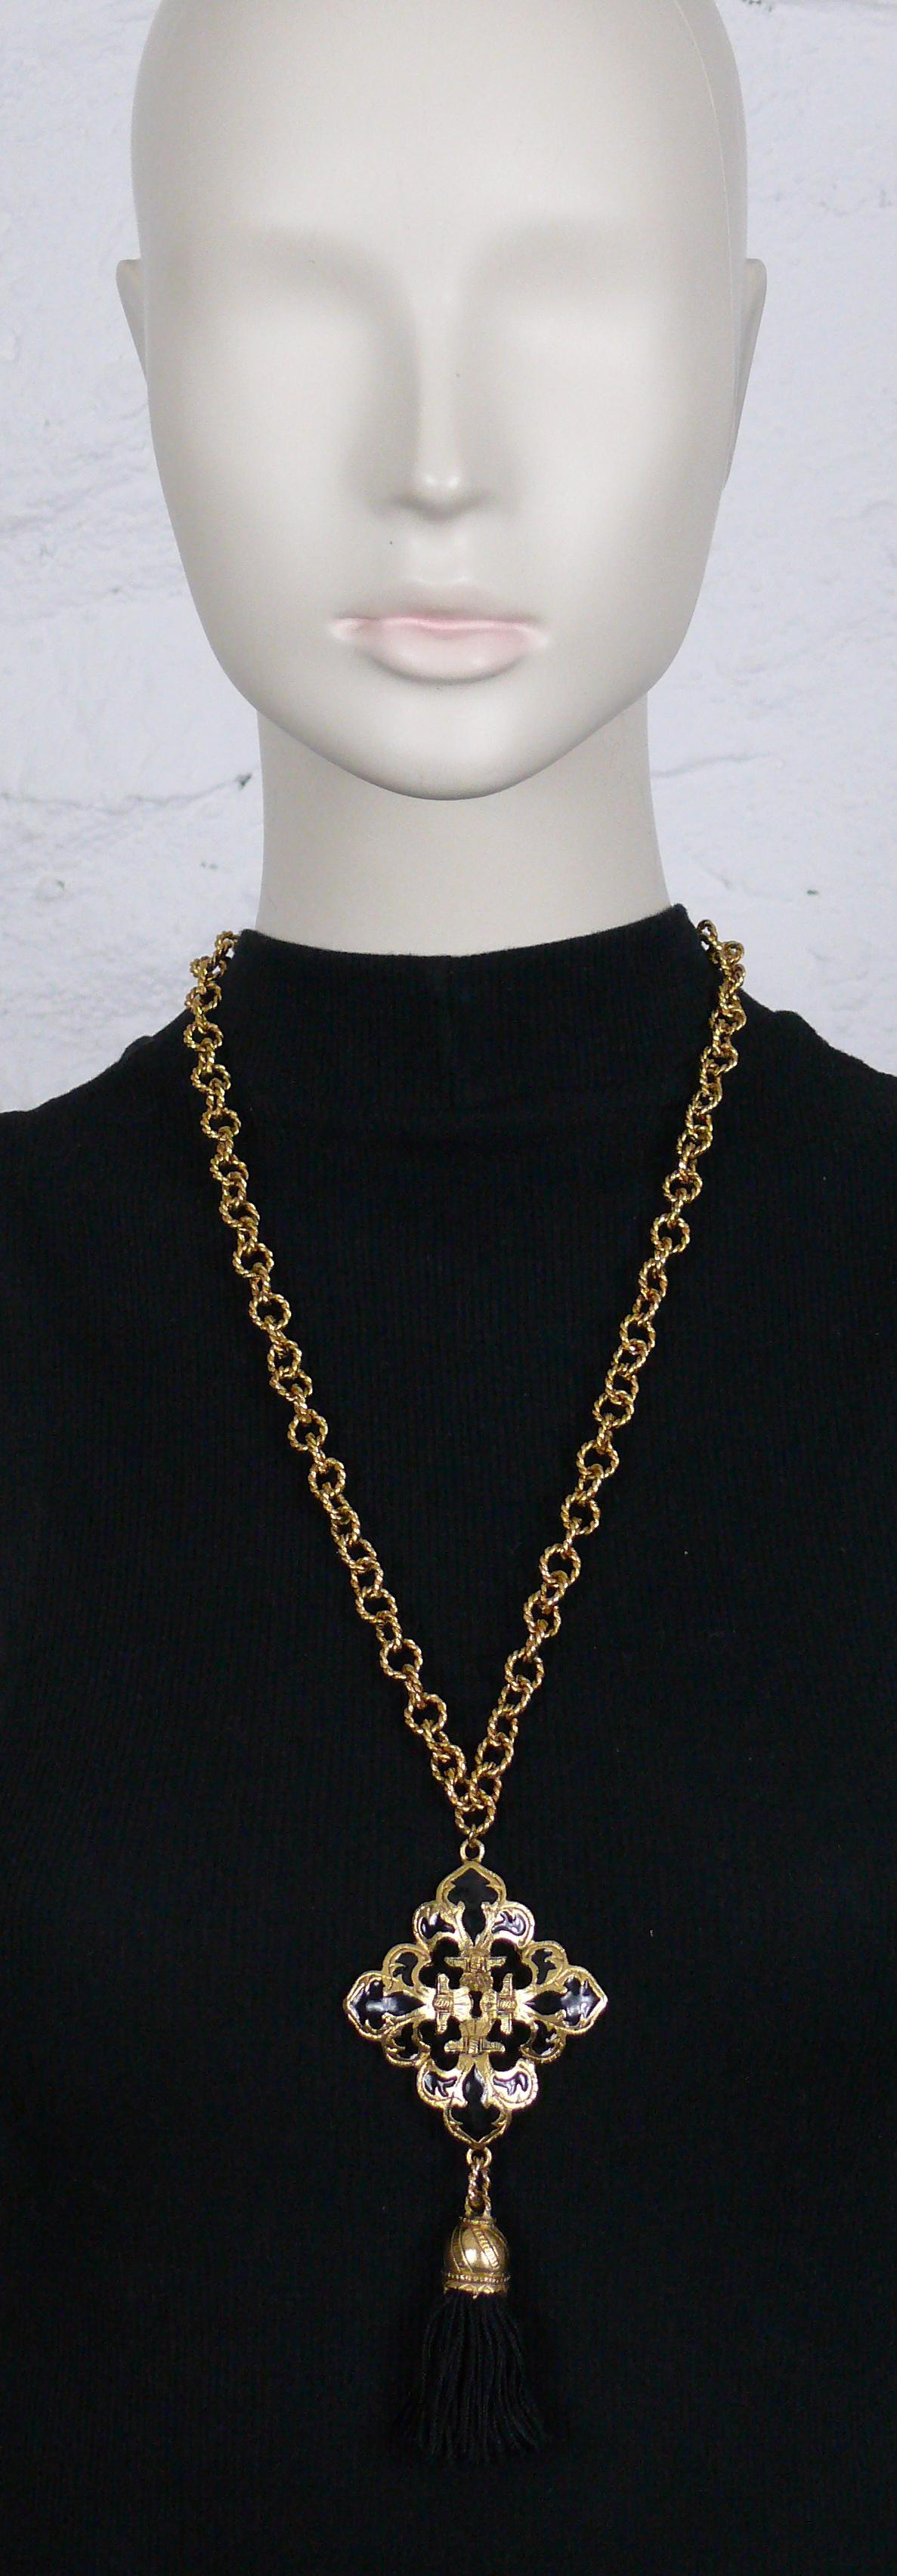 CHANTAL THOMASS vintage antiqued gold toned rope-like link chain necklace featuring a four fleur-de-lis pendant embellished with black enamel and a black tassel.

Embossed CHANTAL THOMASS.

Indicative measurements : chain length approx. 64.5 cm